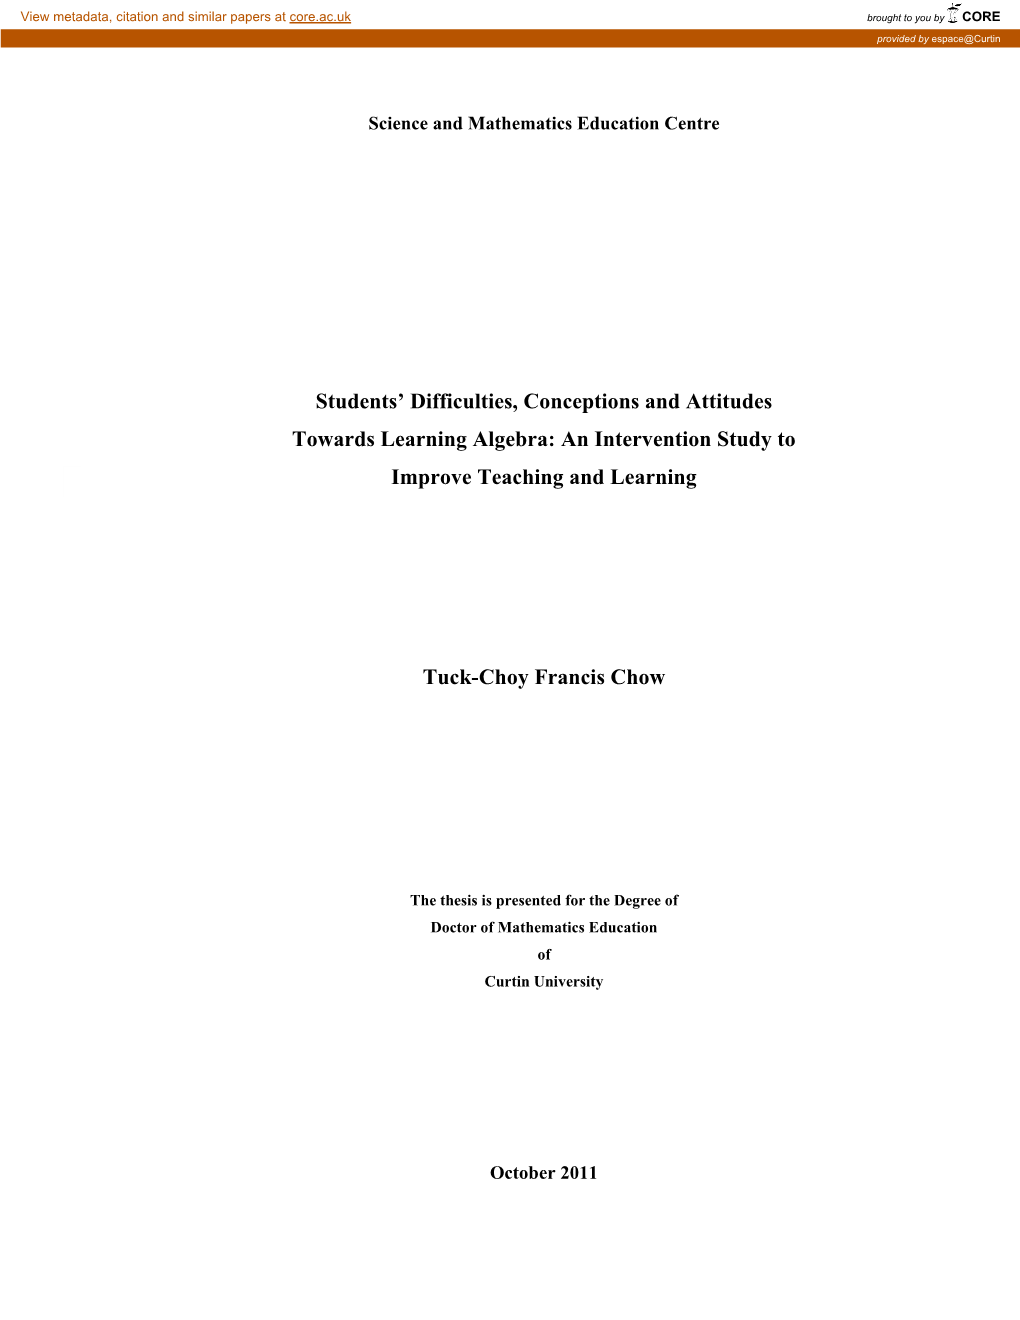 Students' Difficulties, Conceptions and Attitudes Towards Learning Algebra